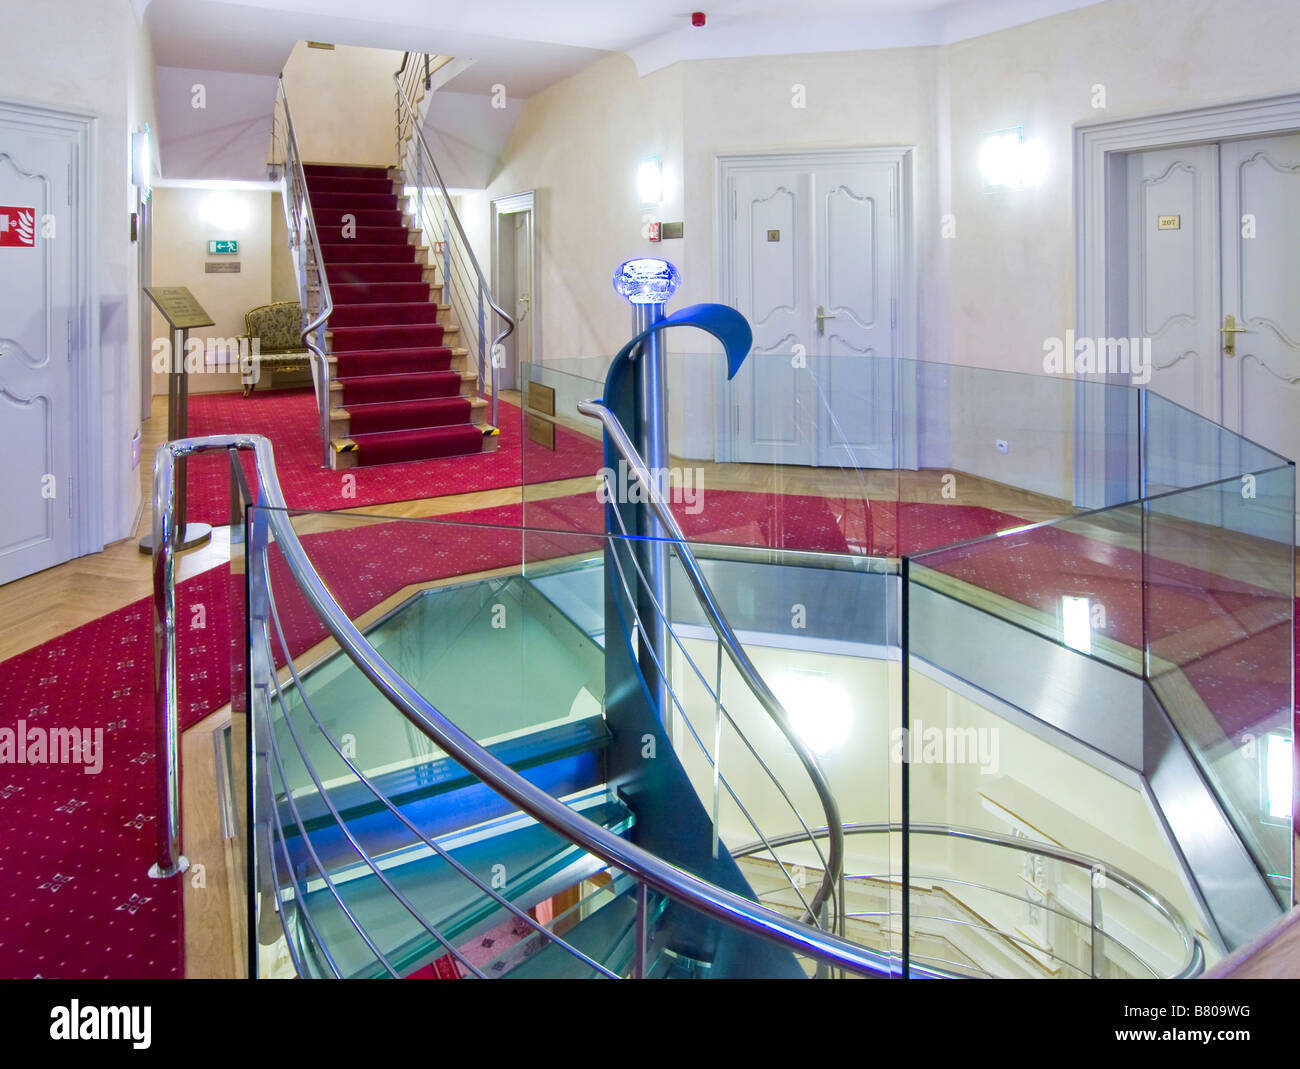 Hotel hallway with a modern staircase Stock Photo